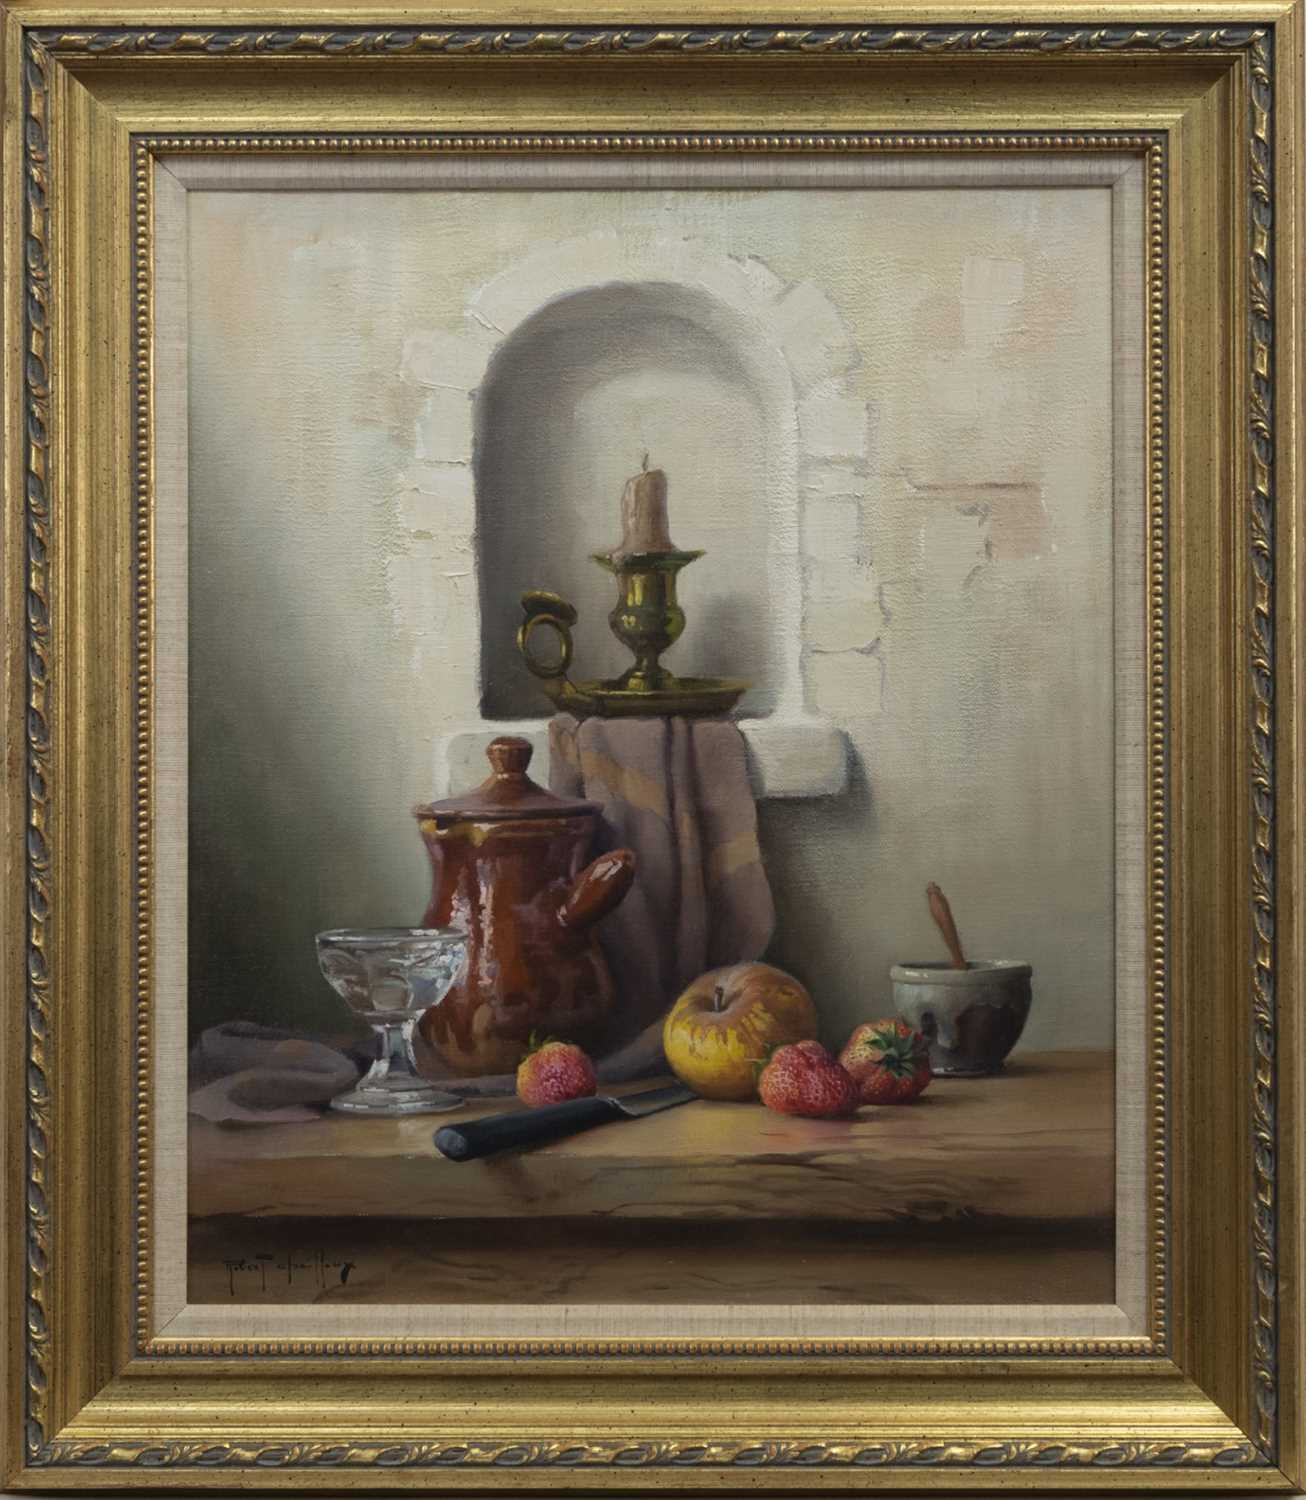 Lot 95 - STILL LIFE WITH NICHE, AN OIL BY ROBERT CHAILLOUX